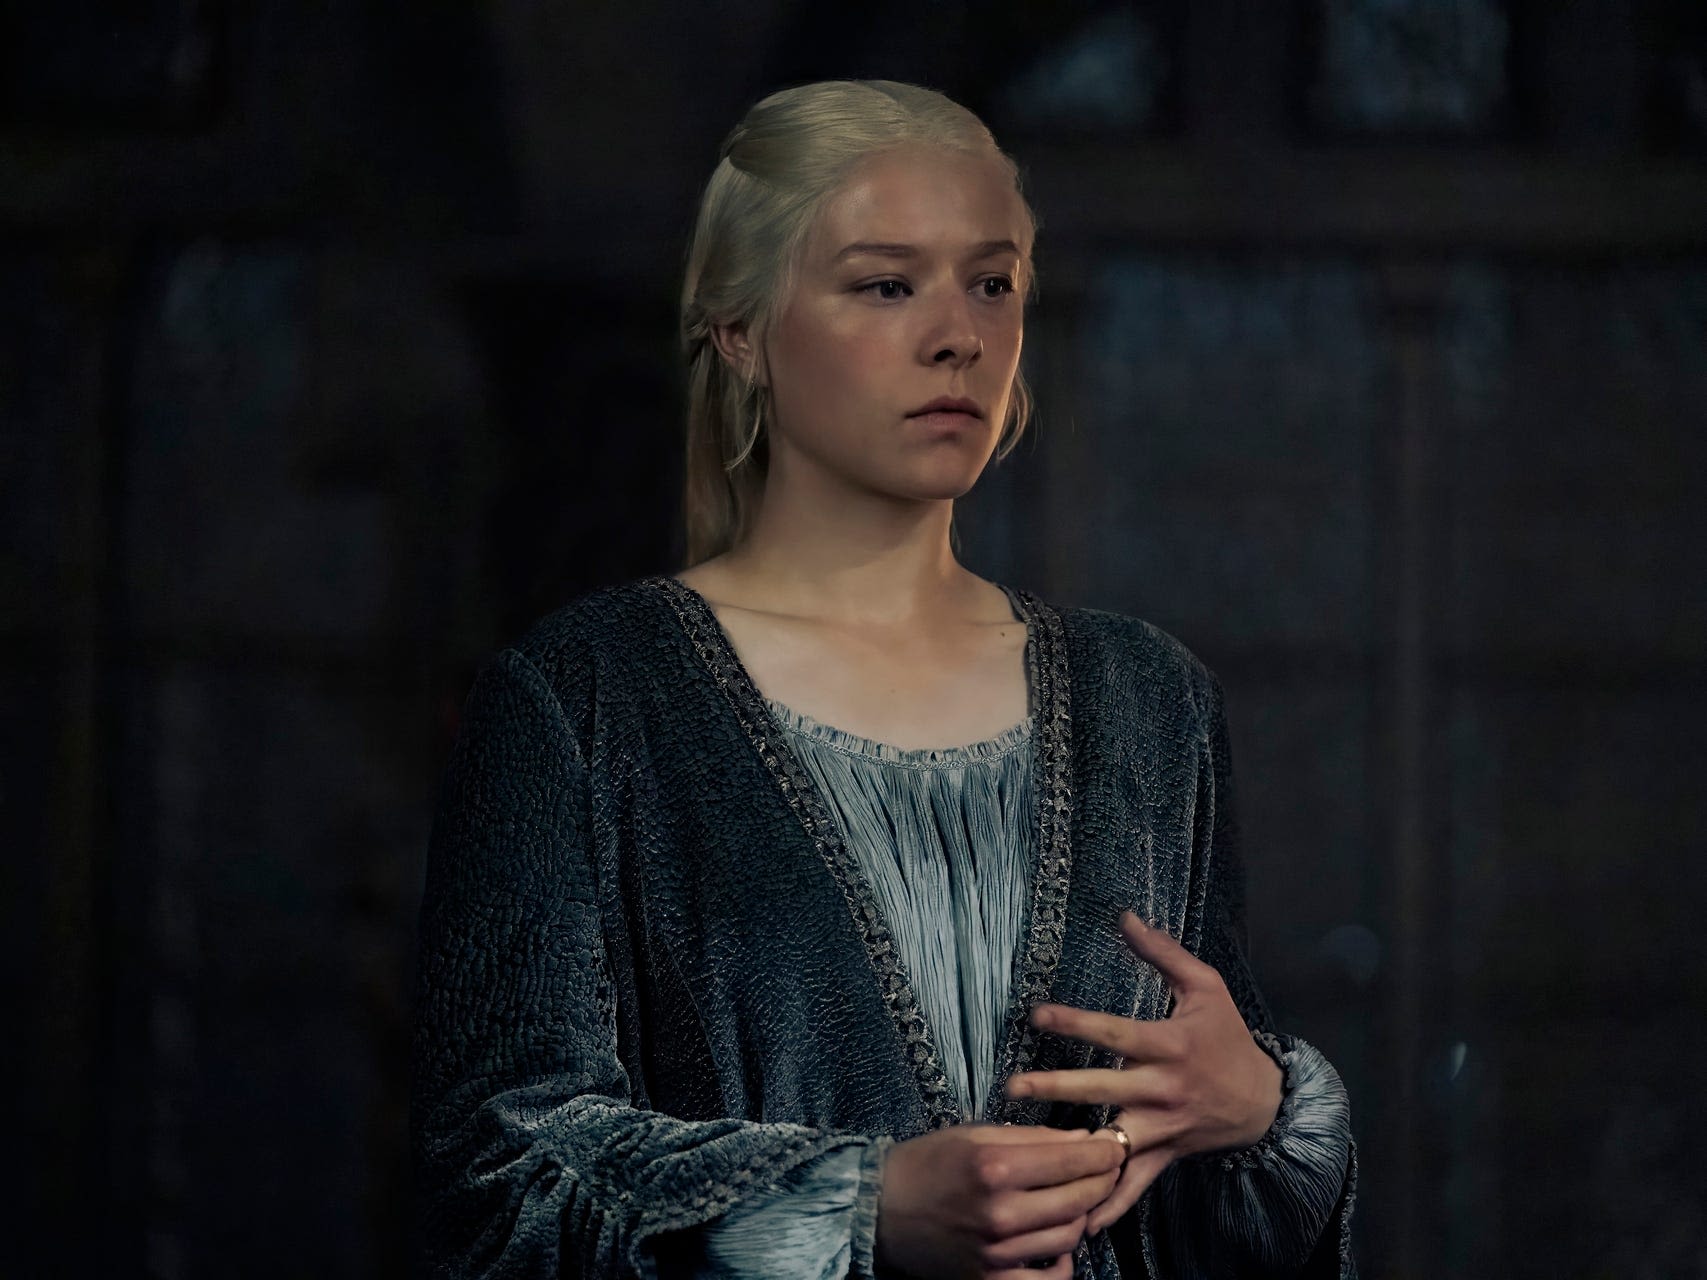 Here's what will happen to Rhaenyra Targaryen on 'House of the Dragon,' if it follows her fate in the book